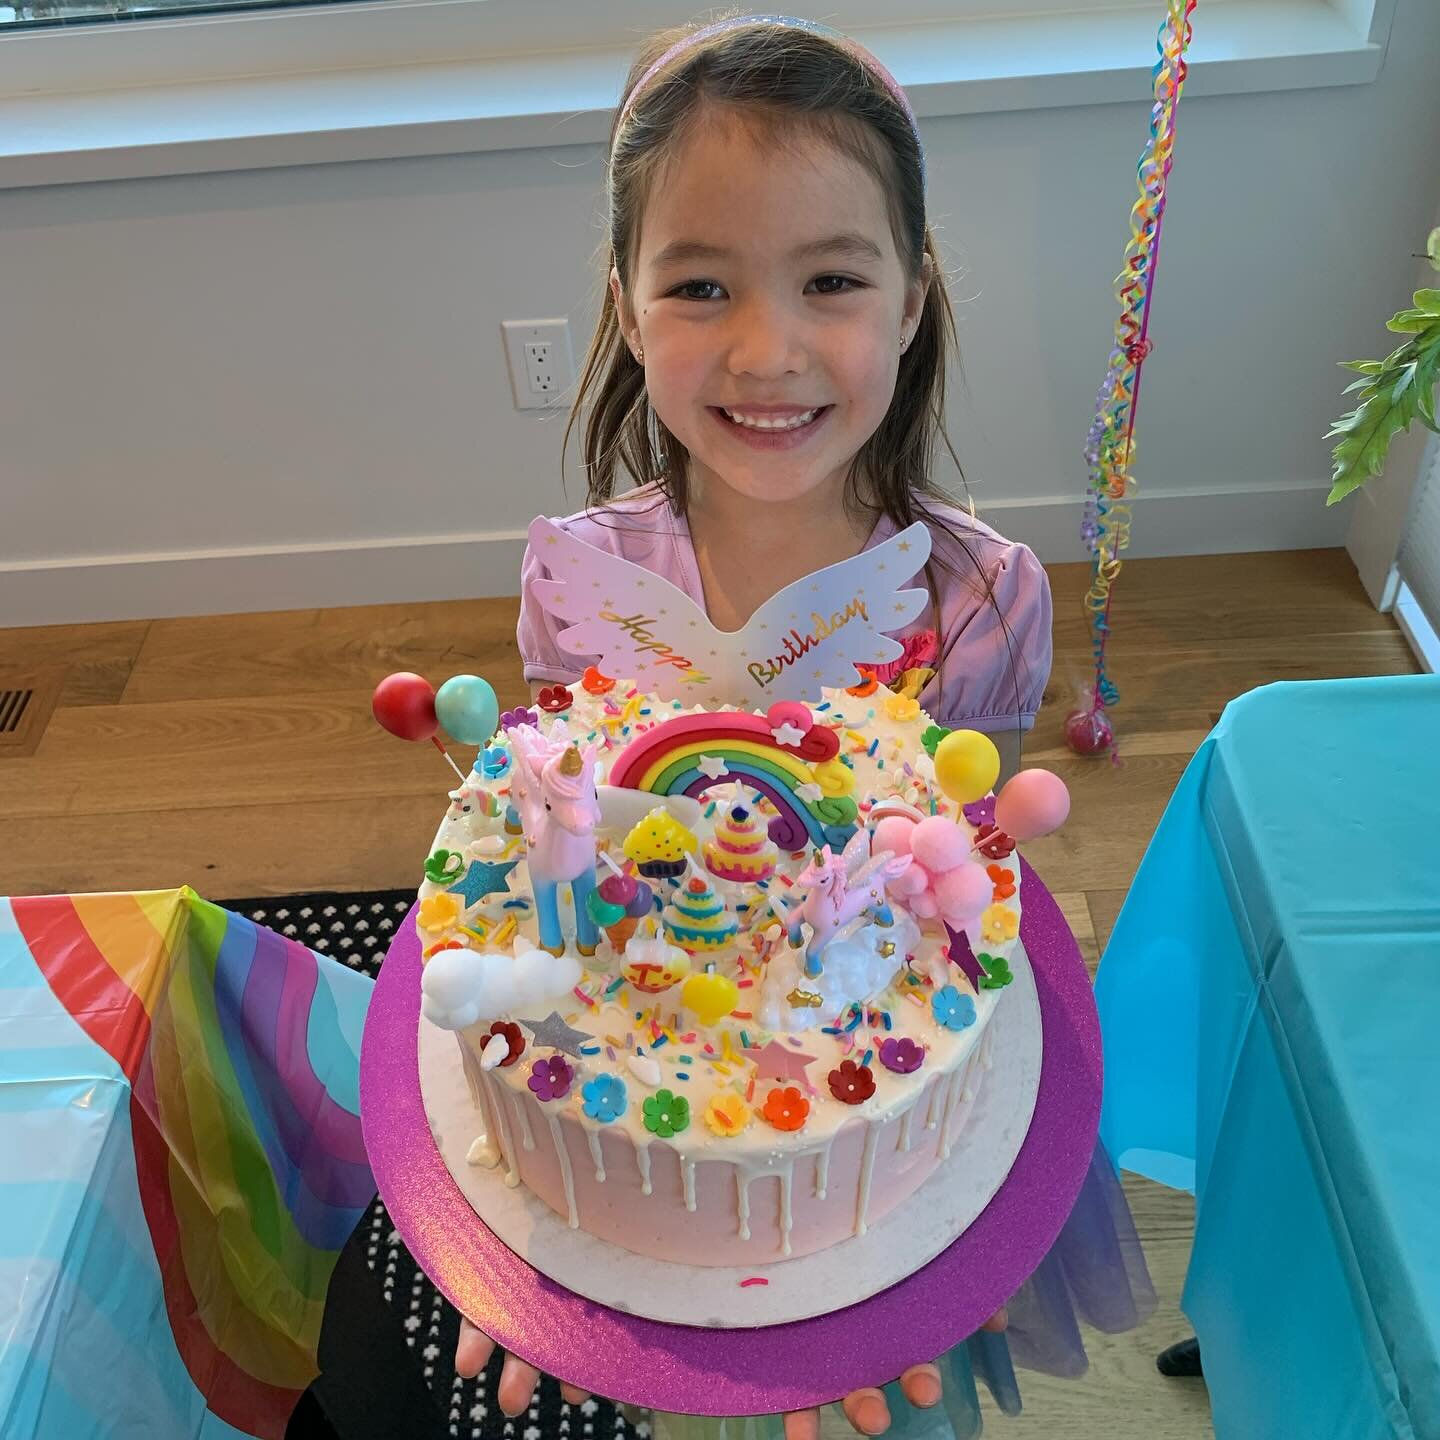 A colourful day, full of 🌈rainbows and love, celebrating our &ldquo;Bright One&rdquo; #LenaGloria 🌺. She is a SPECTACULAR SIX year old 🎉!!! I love you more everyday and in every way ❤️.